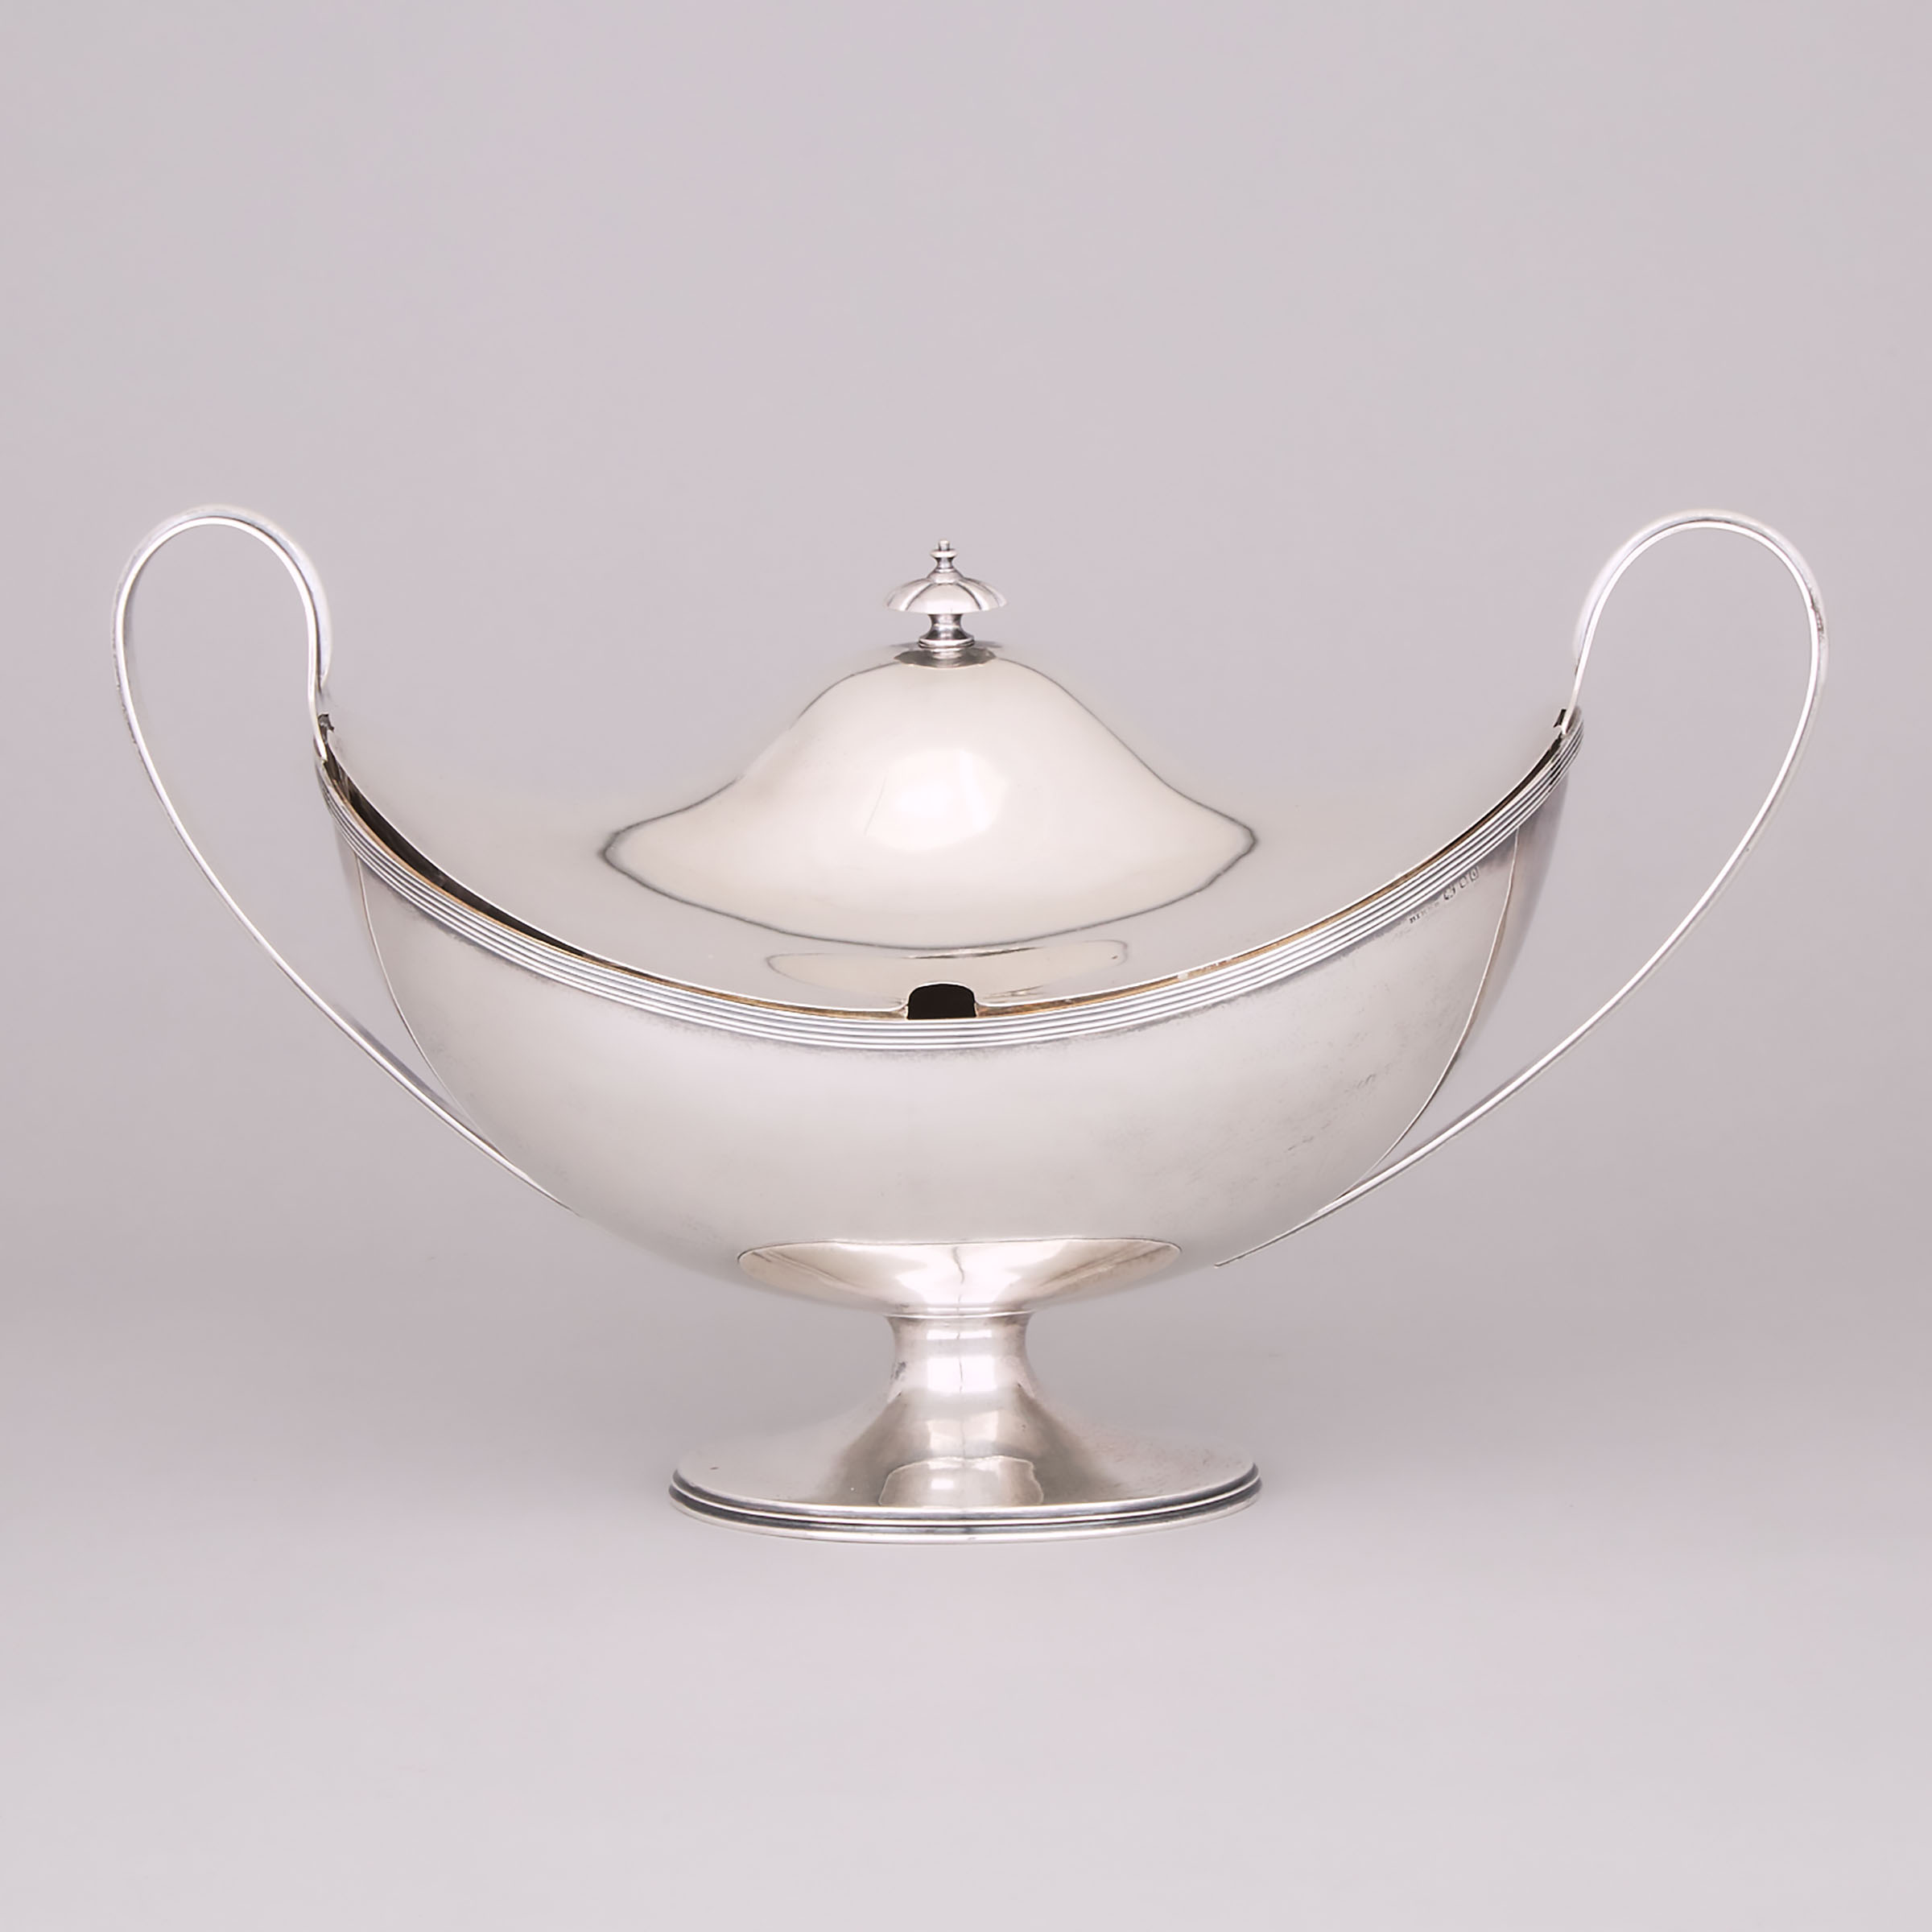 Canadian Silver Oval Covered Soup Tureen, Henry Birks & Sons, Montreal, Que., 1900